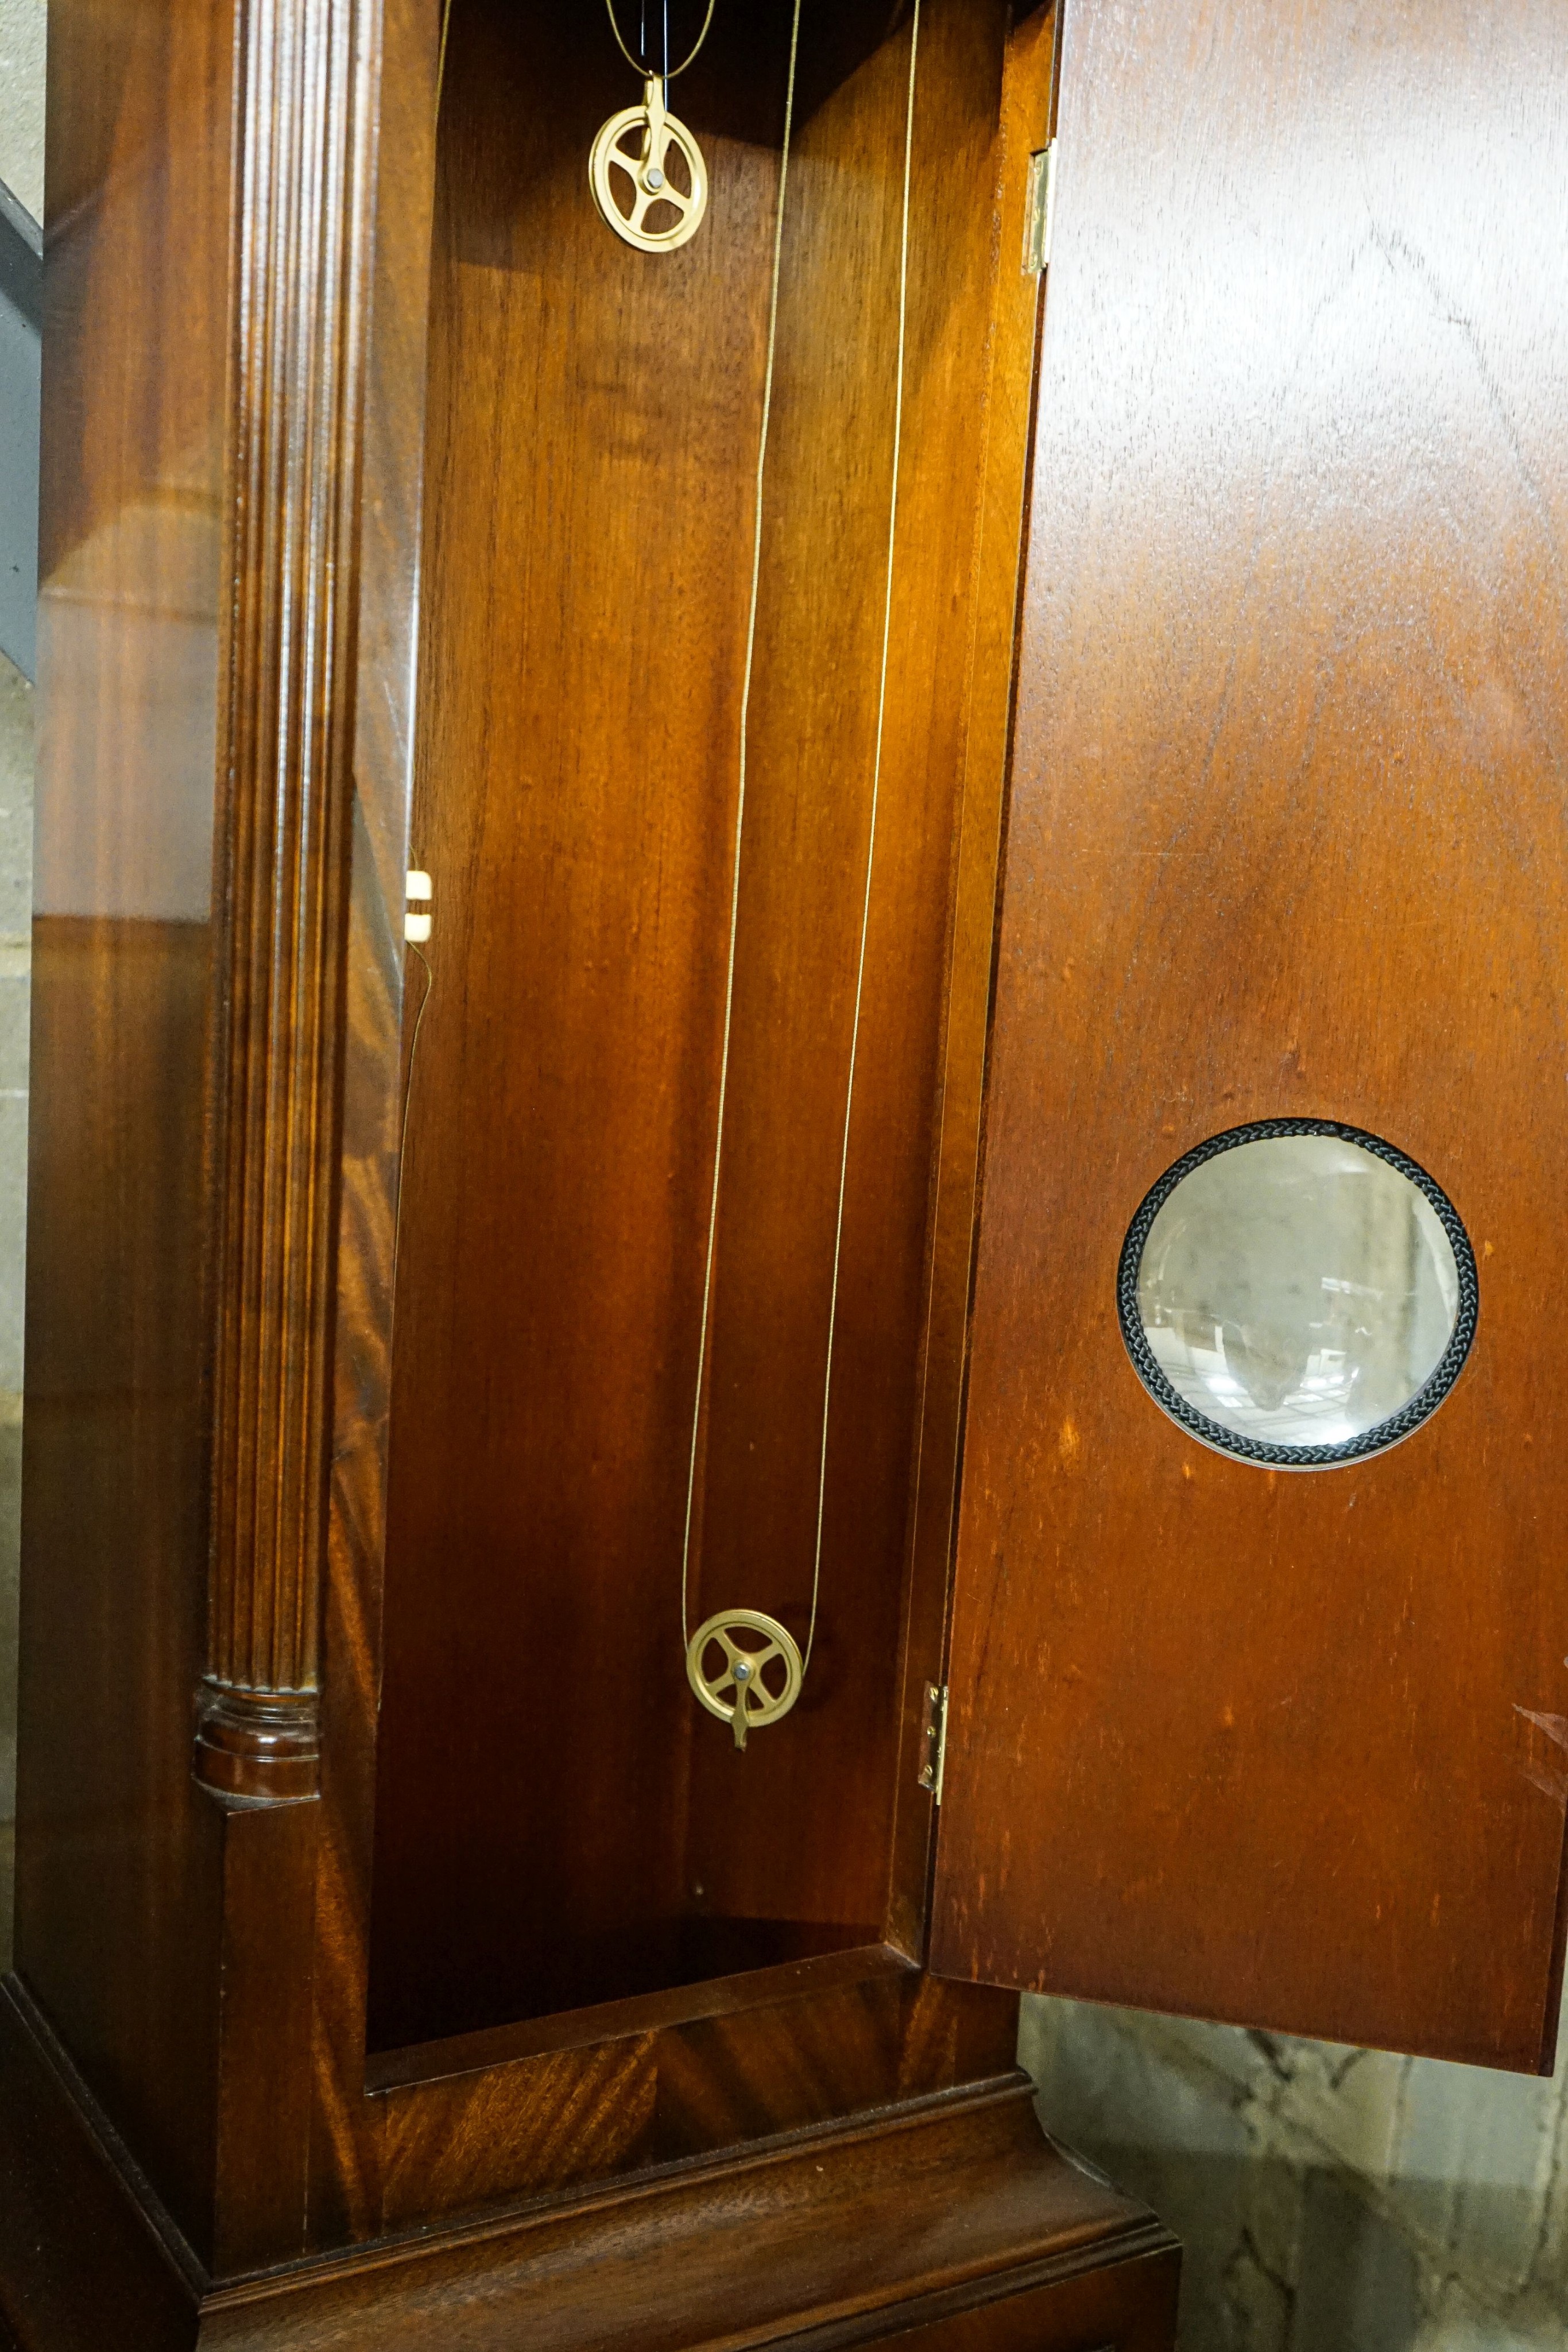 A modern mahogany longcase clock by Comitti London eight day, striking and chiming movement, brass dial with rocking ship automaton, the case with bulls-eye door, height 203cm